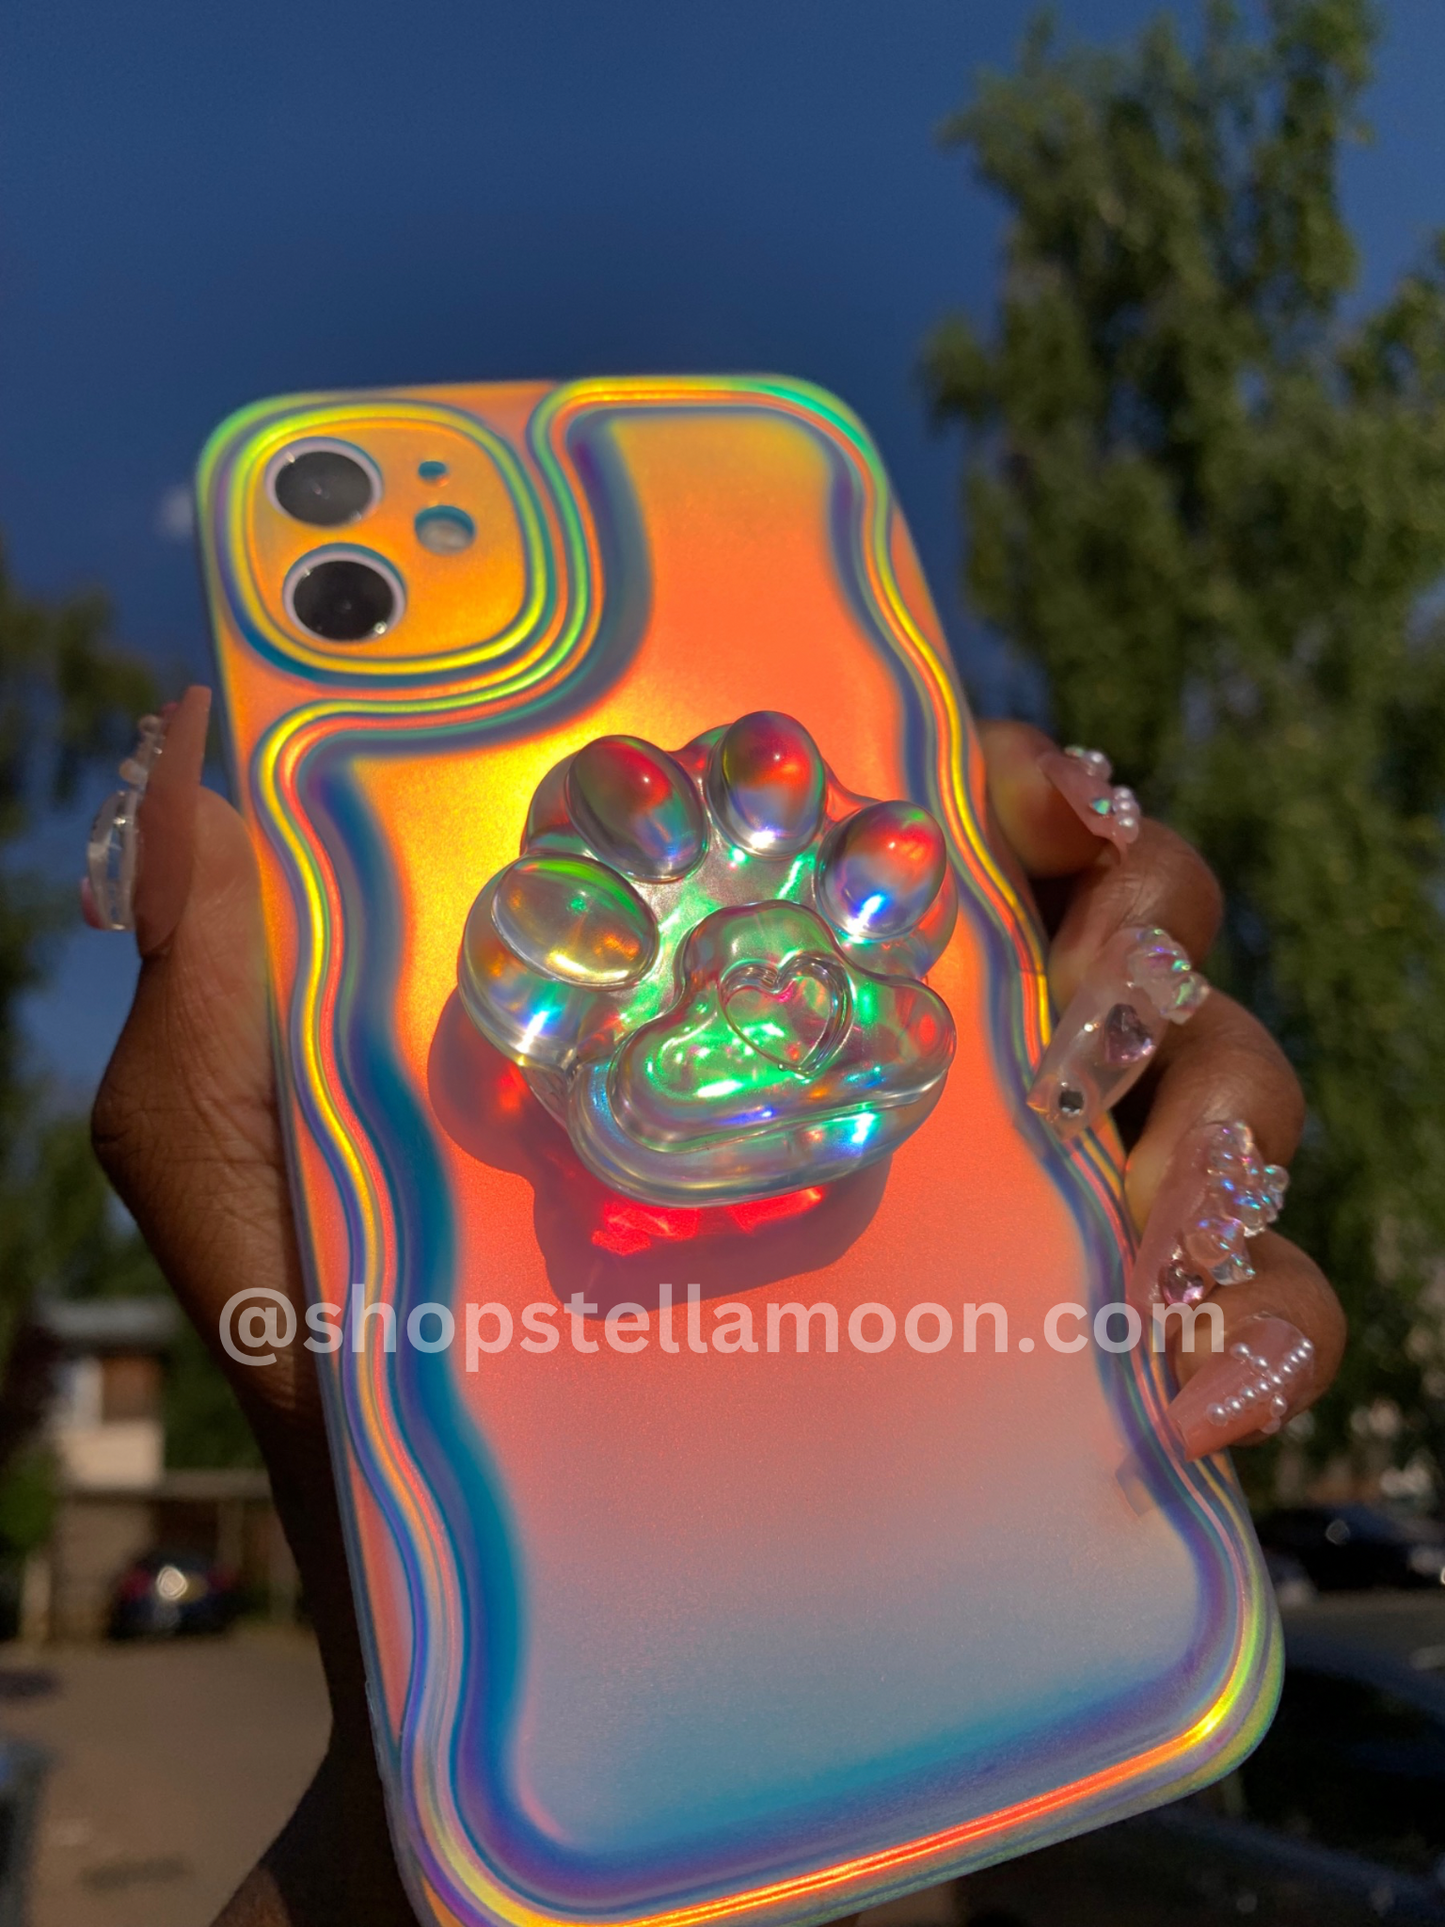 PAWFECT HOLO IPHONE CASE ($29)